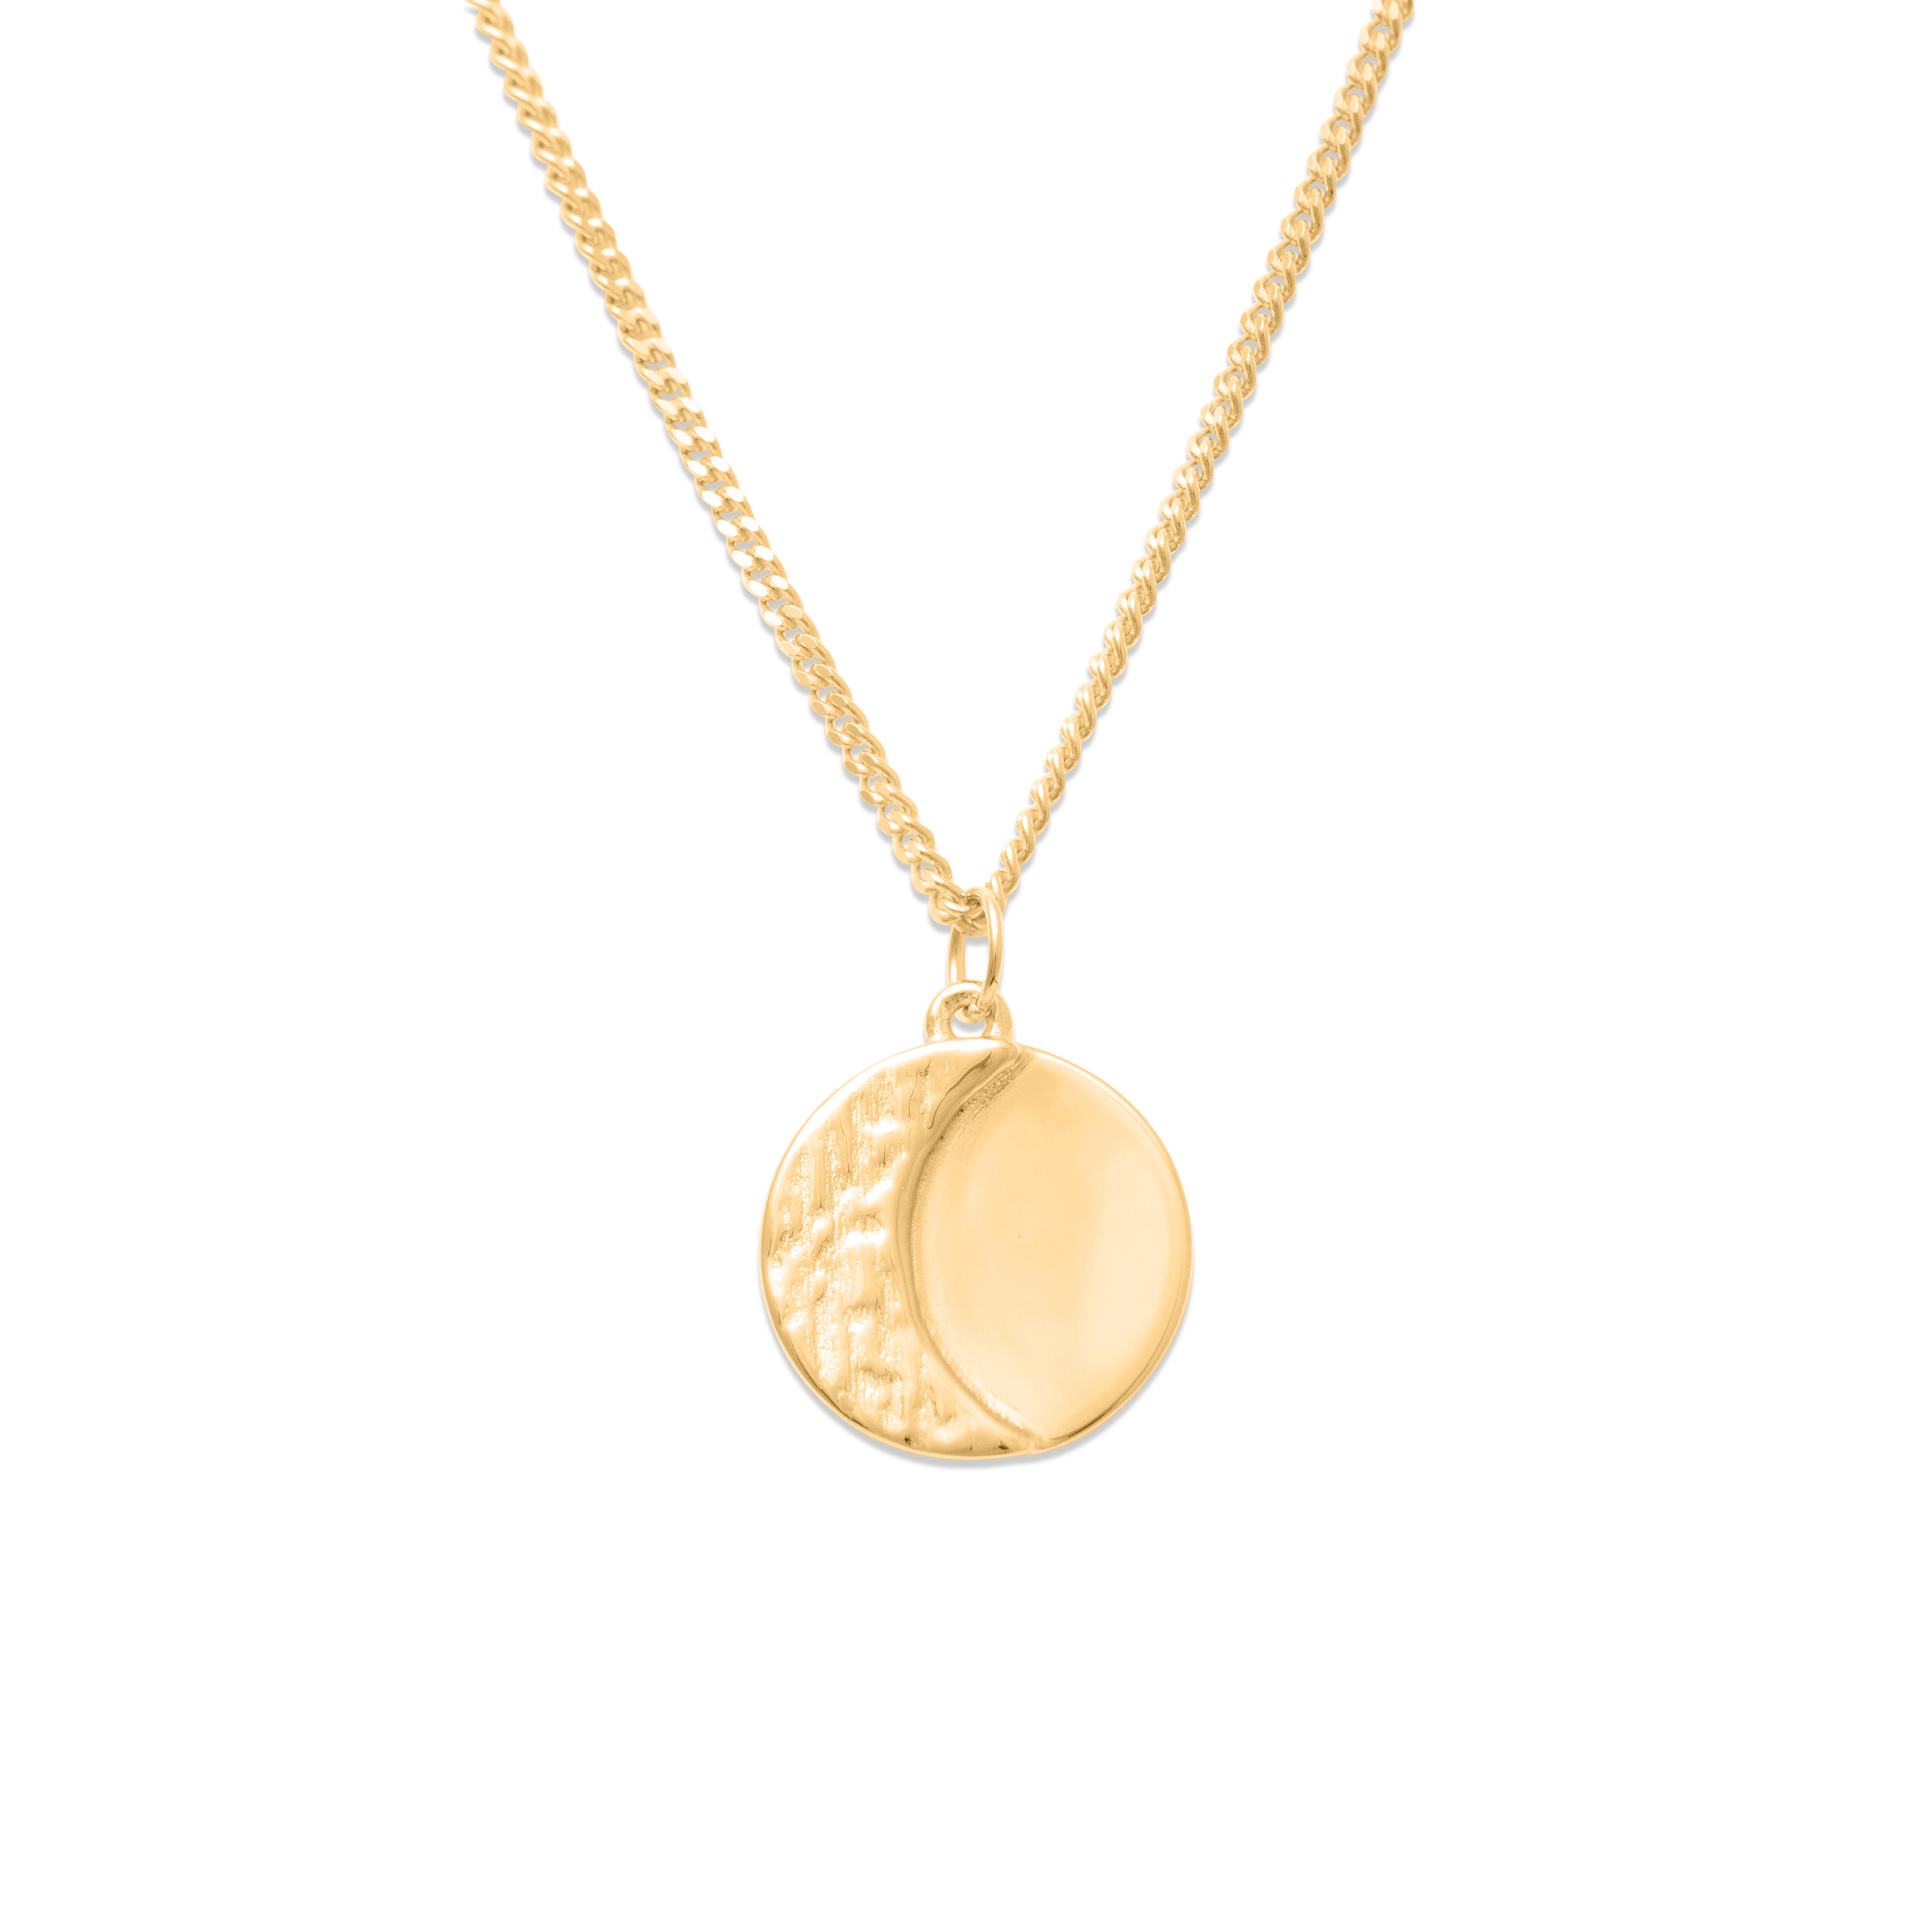 Ours Moon Phases Nr.1 Kette Jewelry ella-thebee 925 Silver Gold Plated 